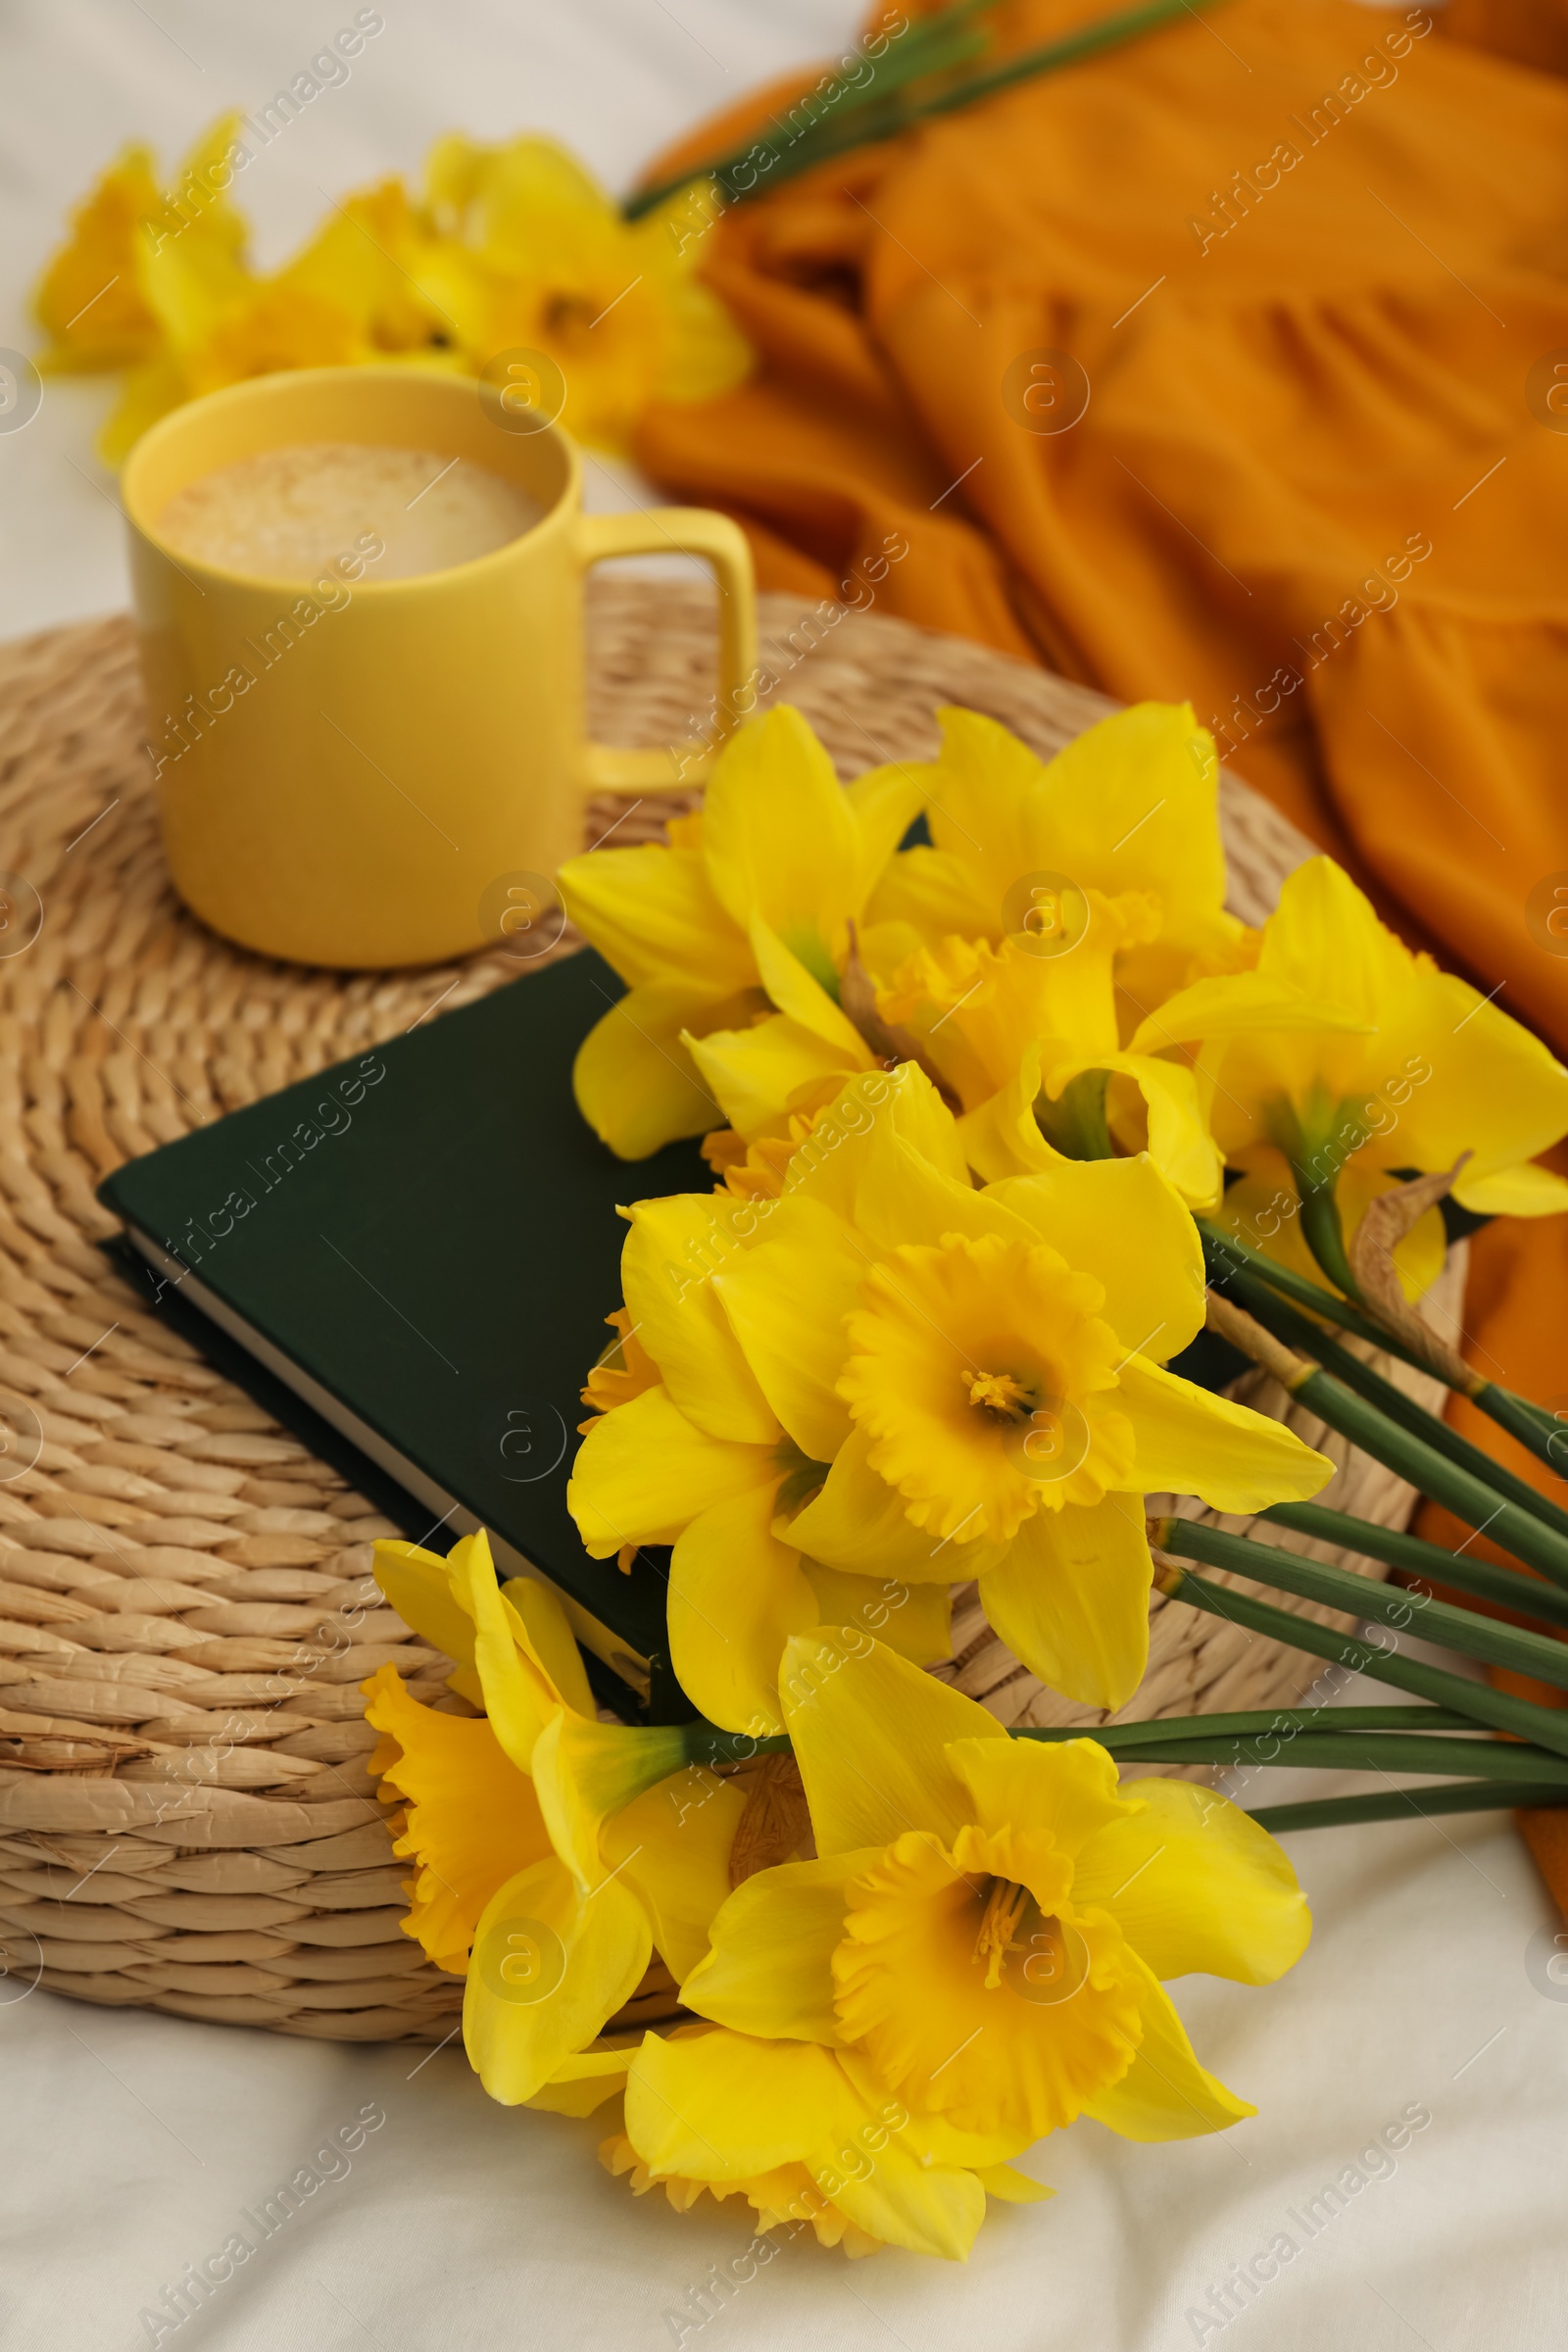 Photo of Bouquet of beautiful daffodils, book and coffee on bed